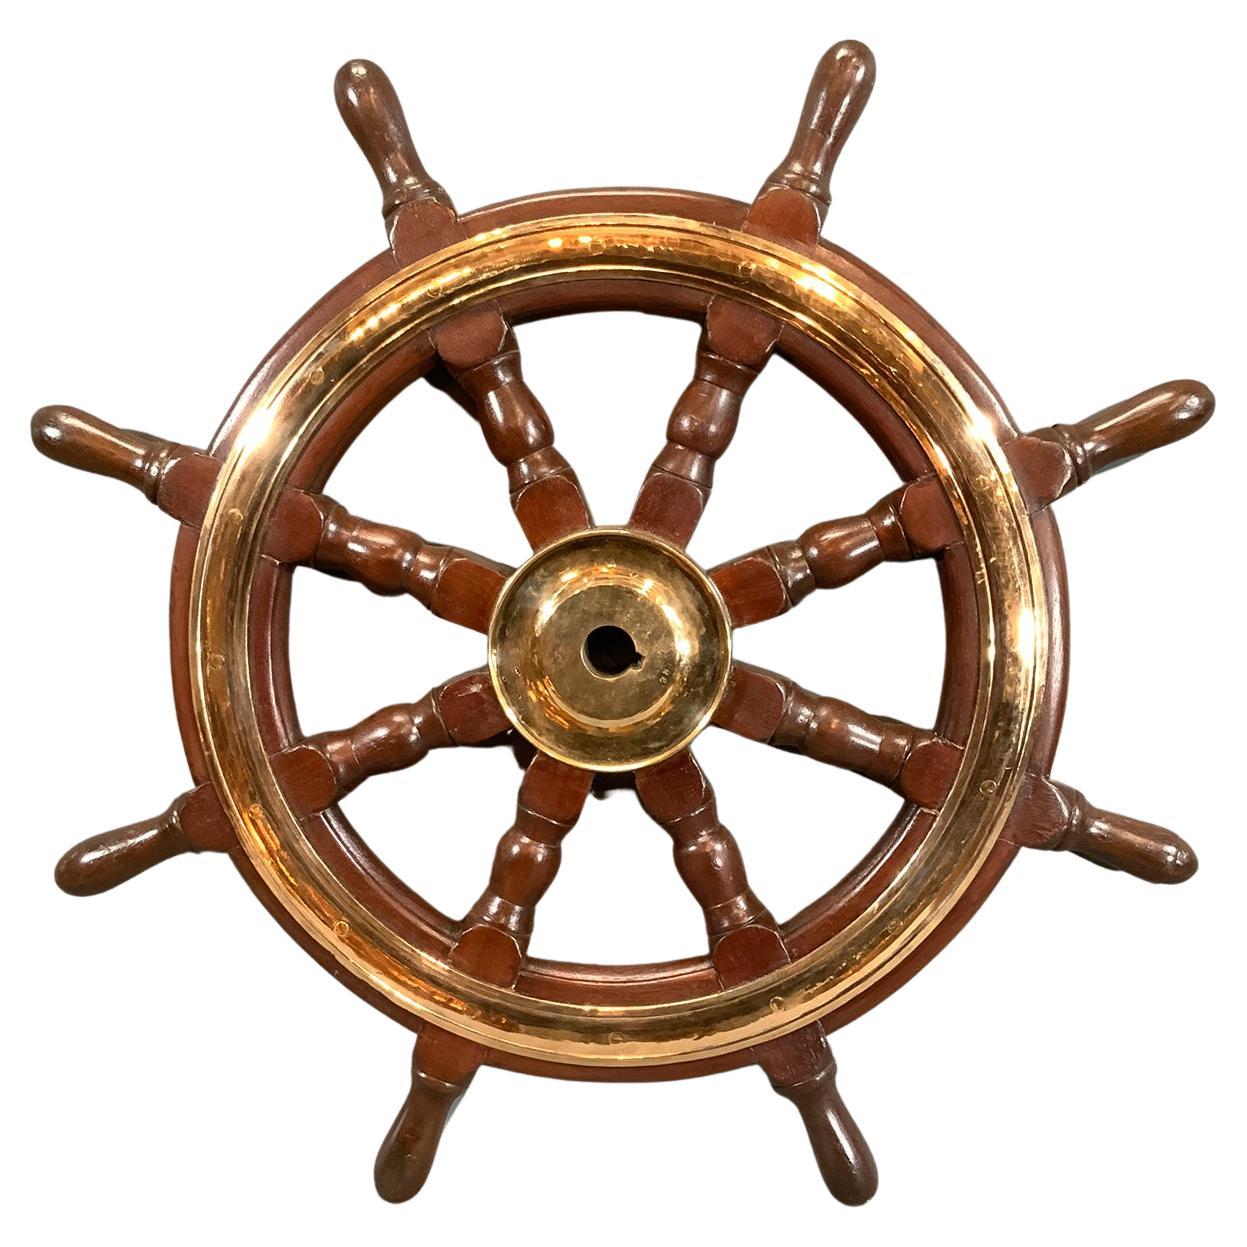 Eight Spoke Ships Wheel with Solid Brass For Sale